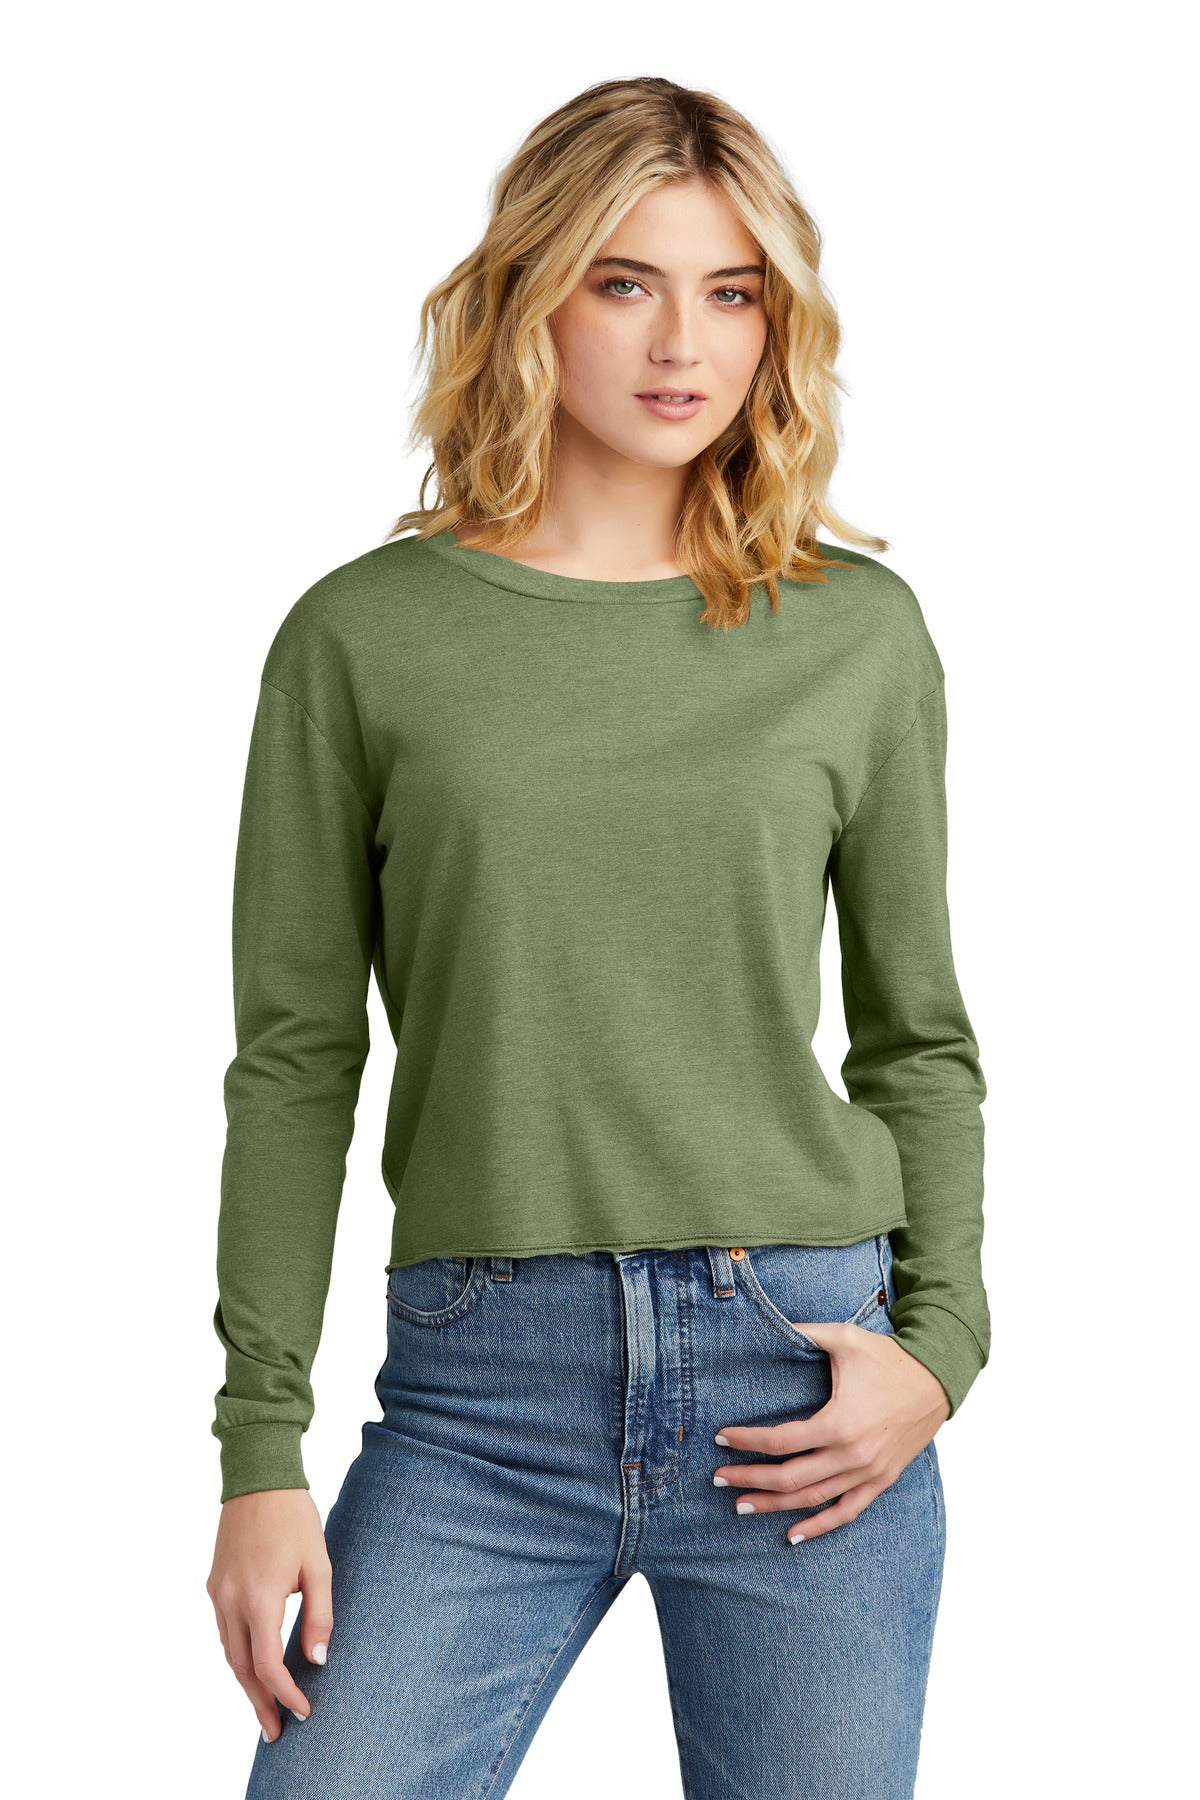 District® Women's Perfect Tri® Midi Long Sleeve Tee DT141